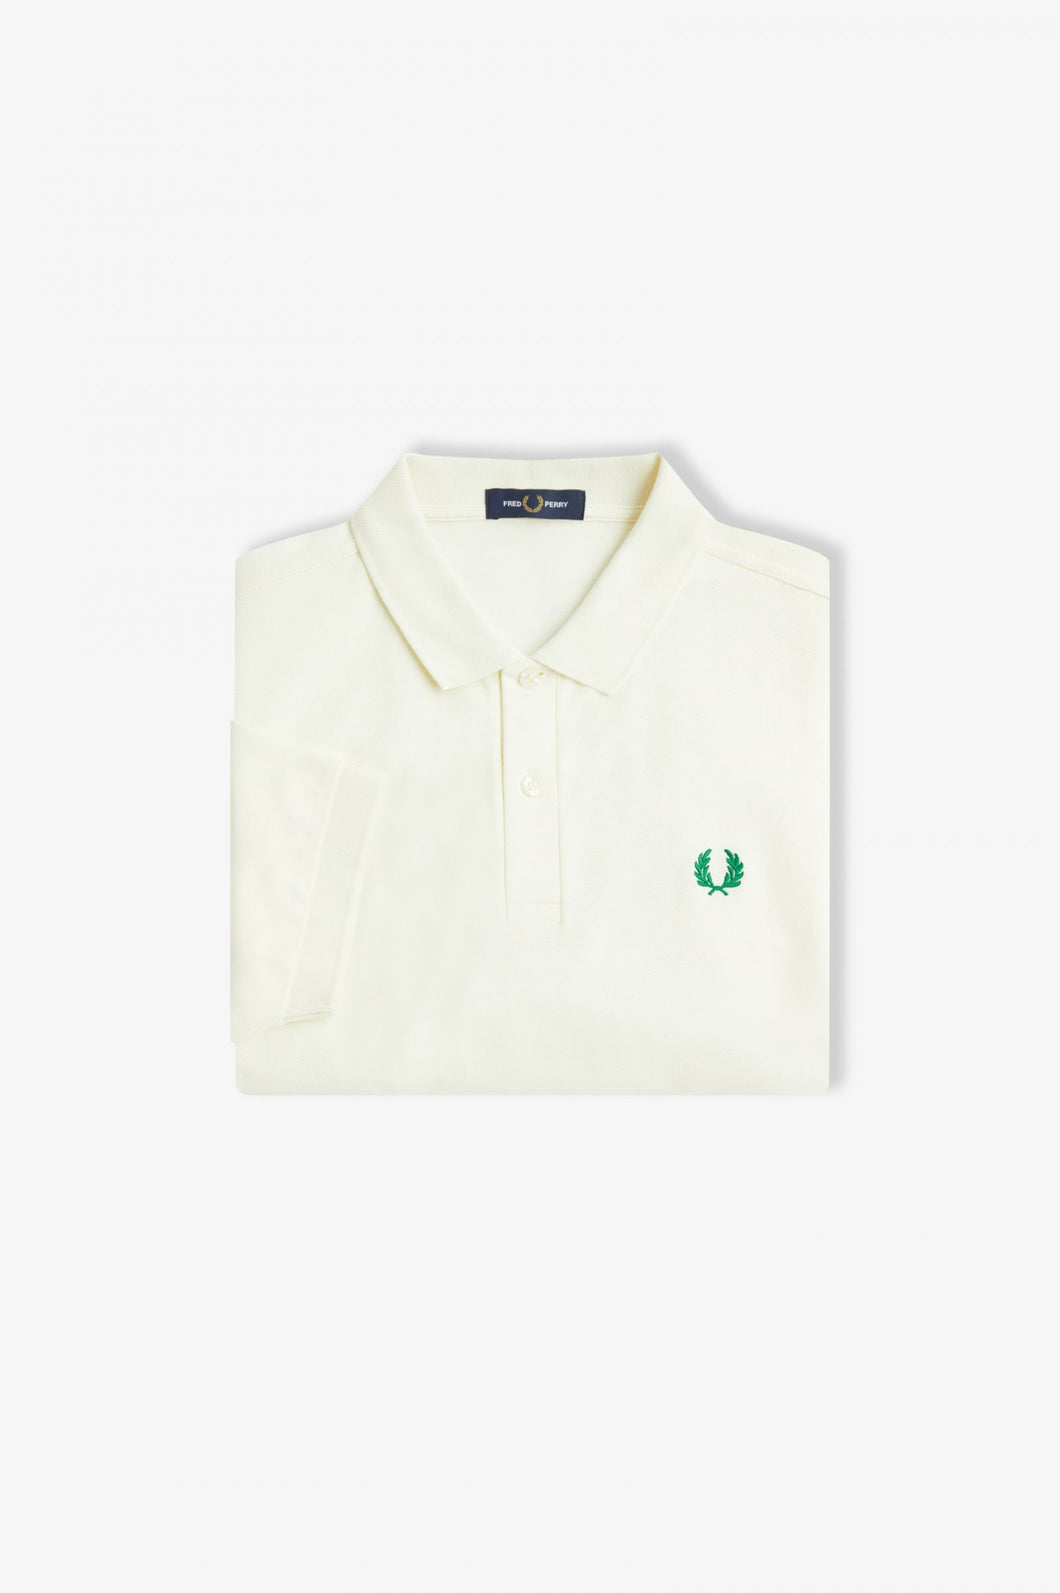 Fred Perry Polo Shirt in Ecru with Emerald Green Laurel detailing